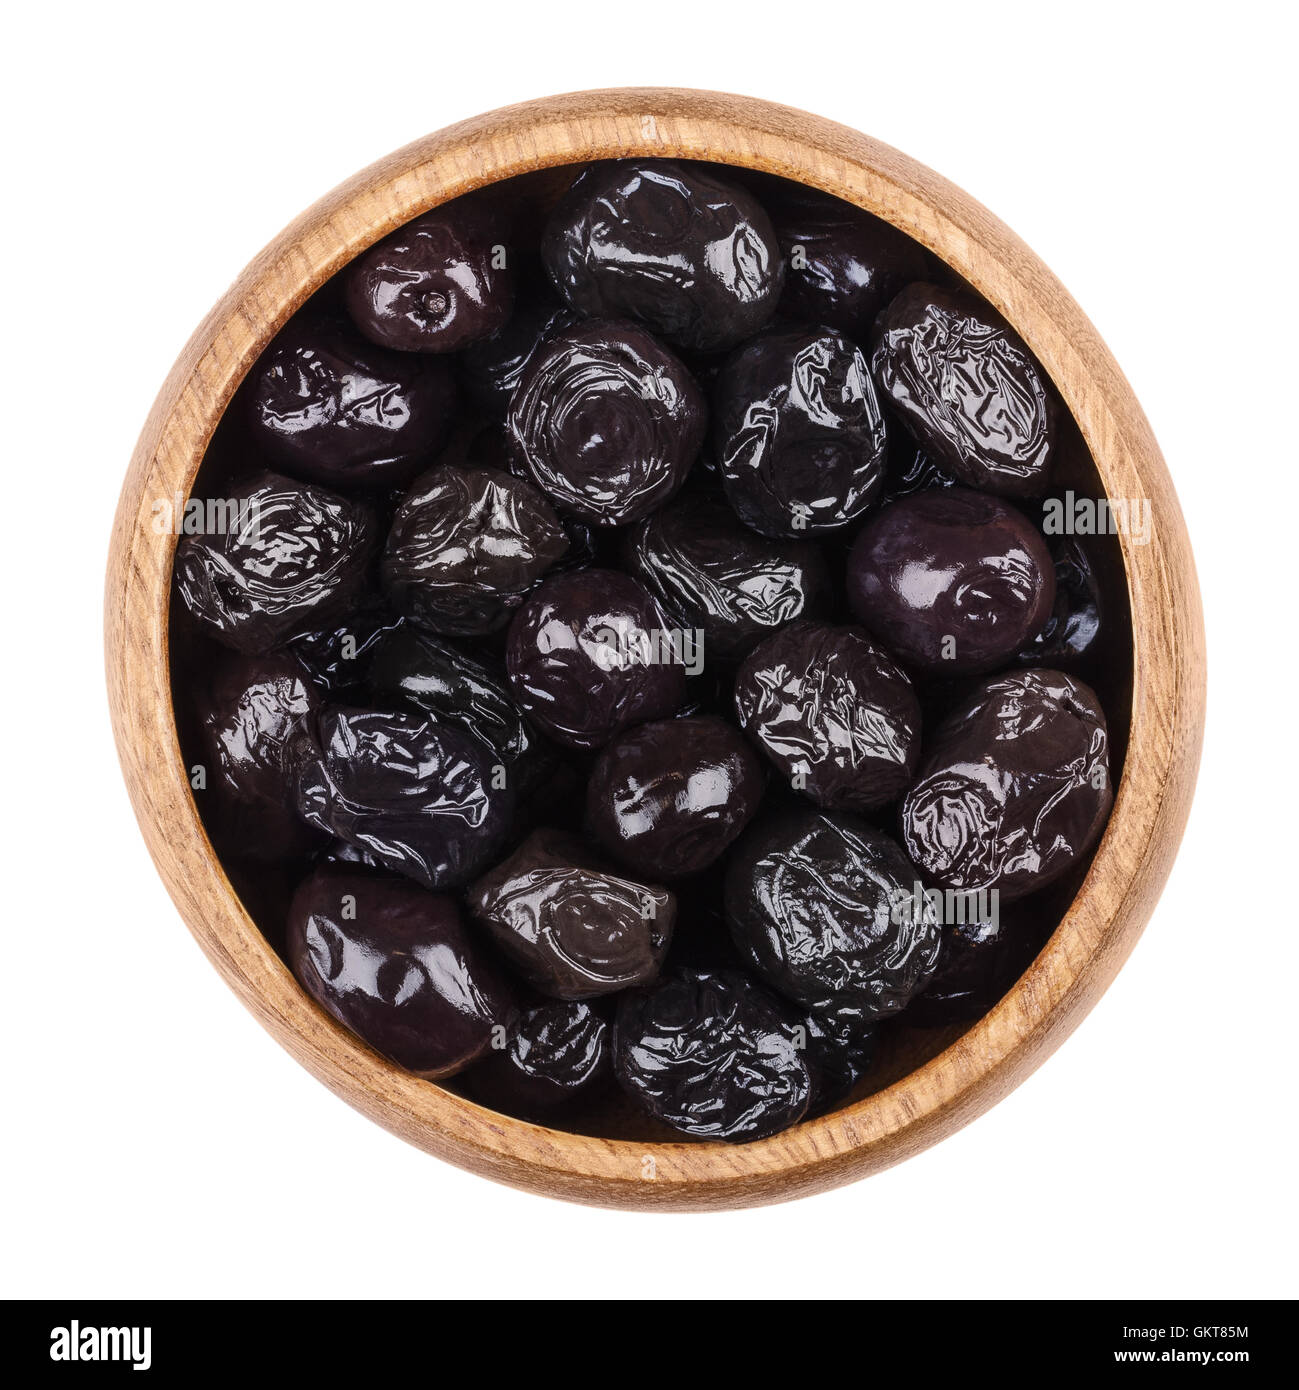 Black olives in a wooden bowl on white background. Dried ripe fruits of Olea europaea. Stock Photo